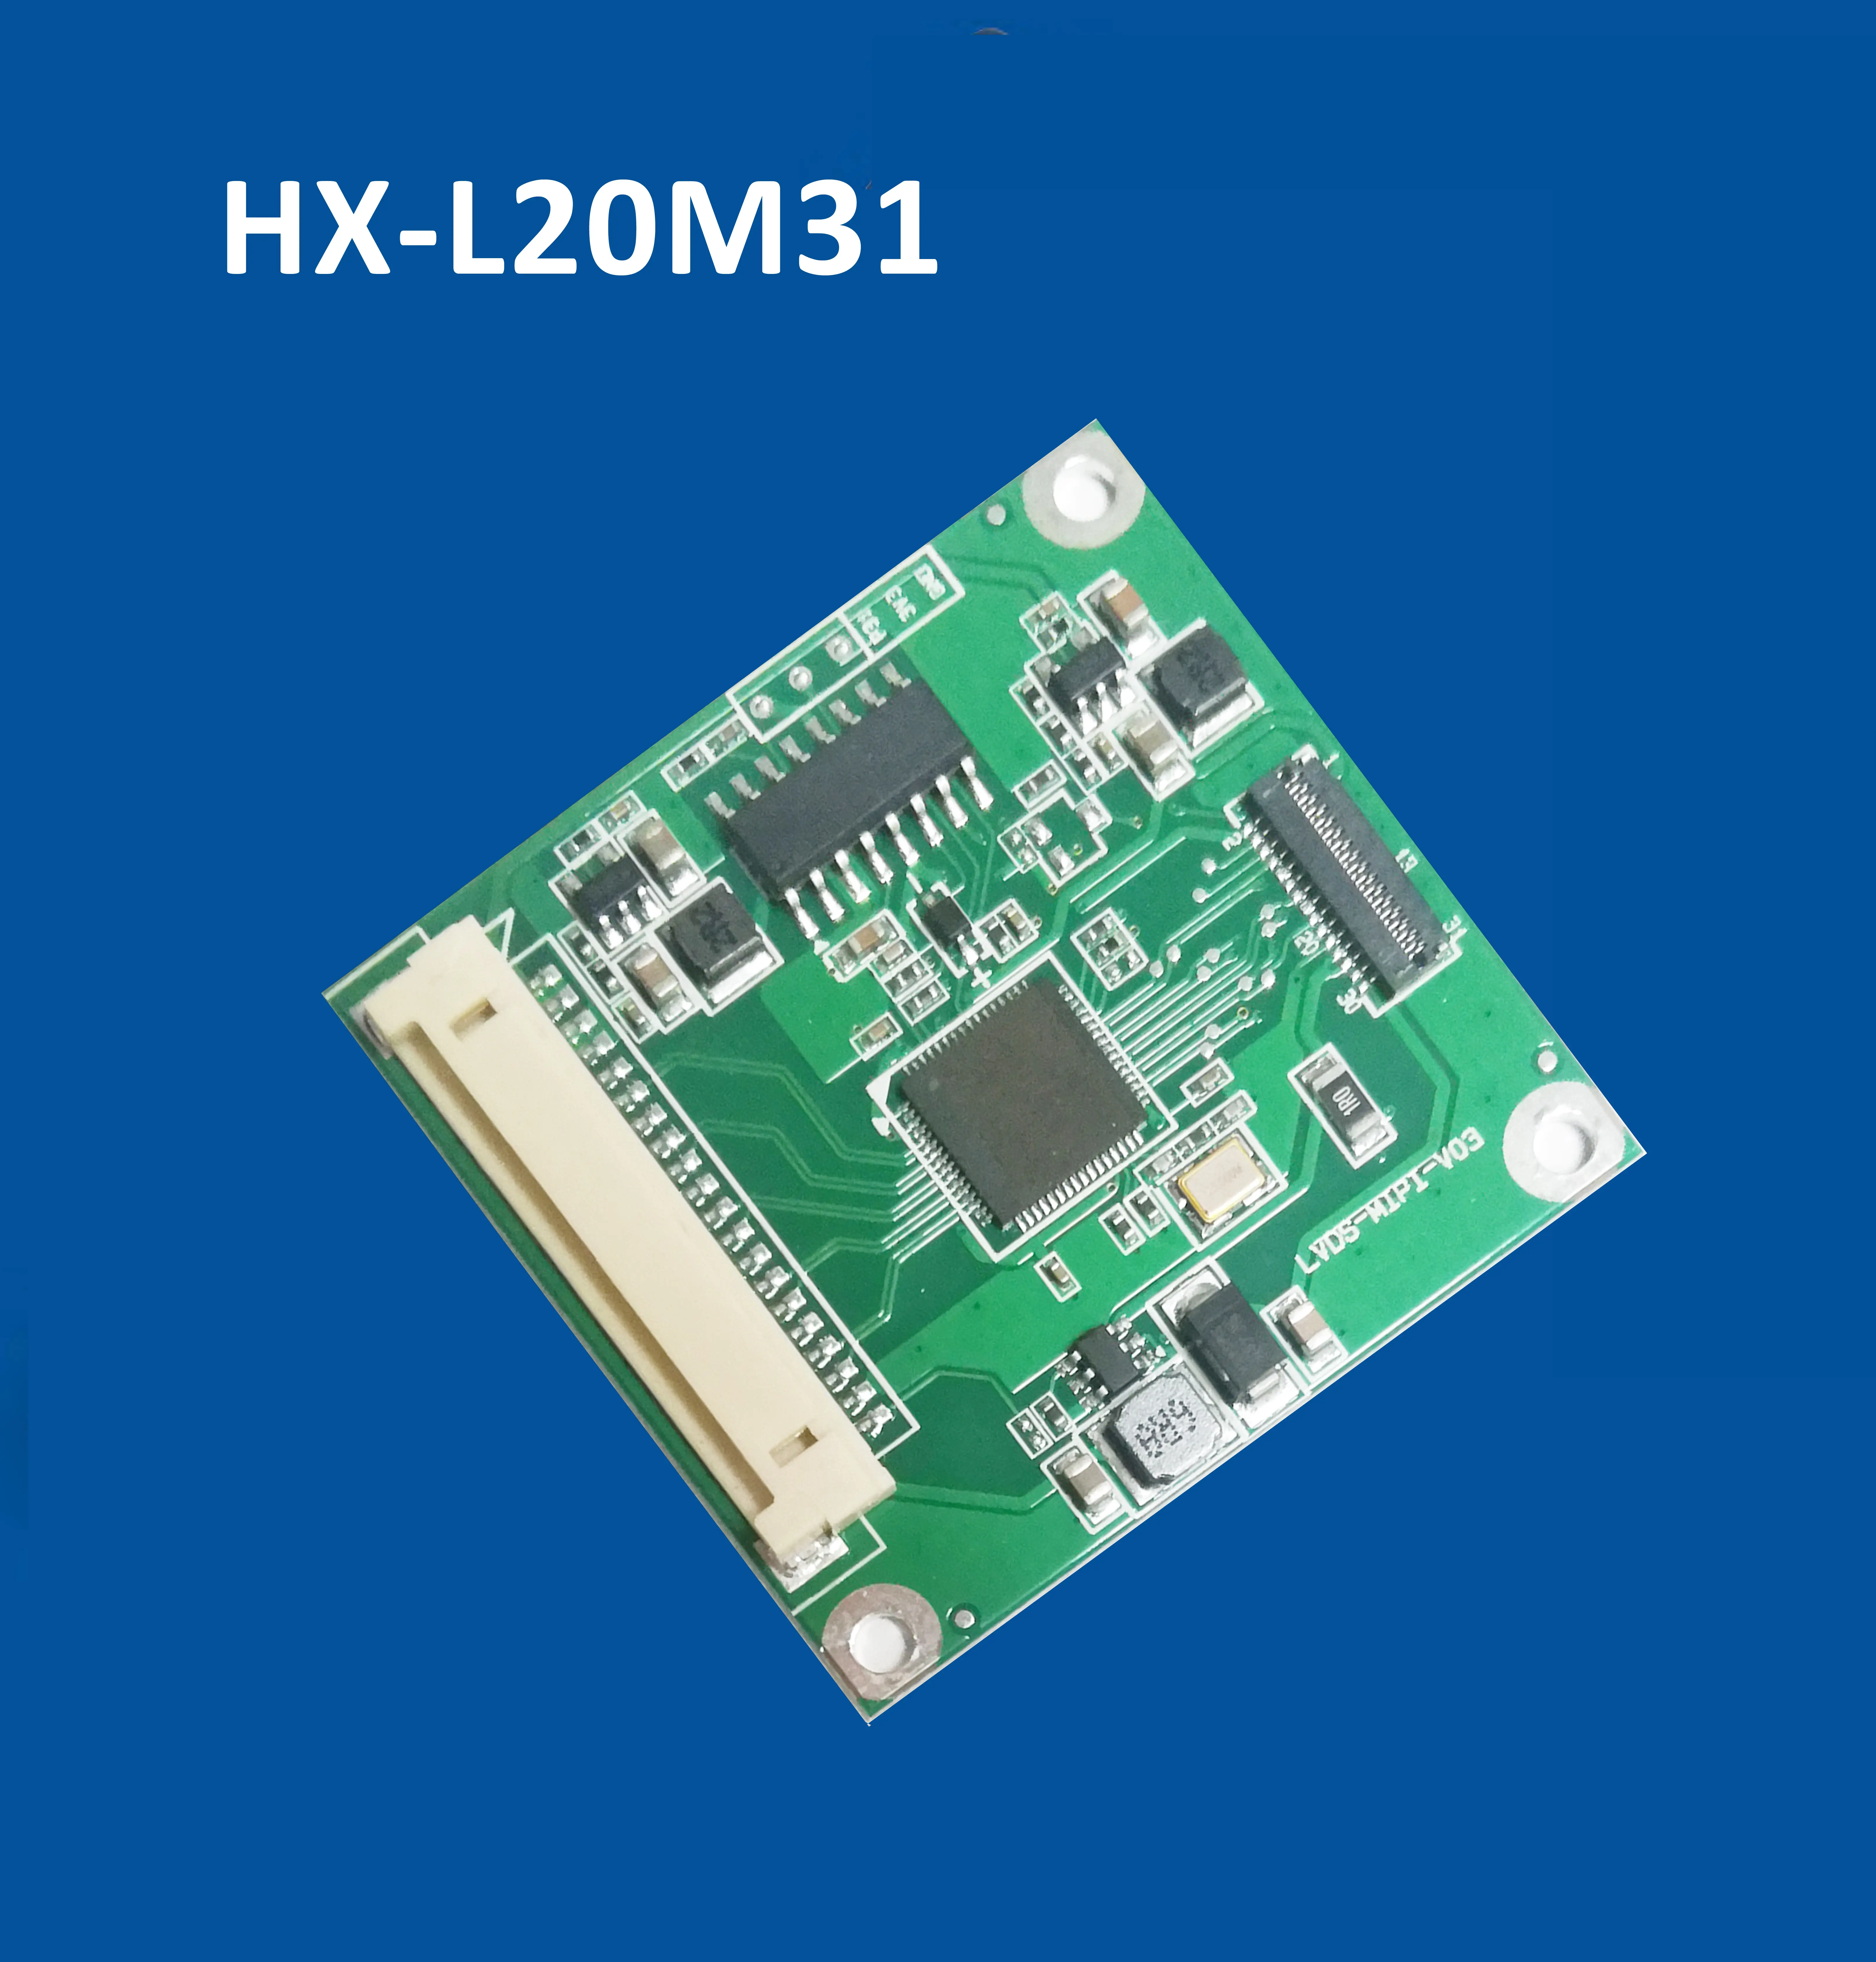 HX-L20M31 LVDS TO MIPI bridge board converter with LVDS input and MIPI output